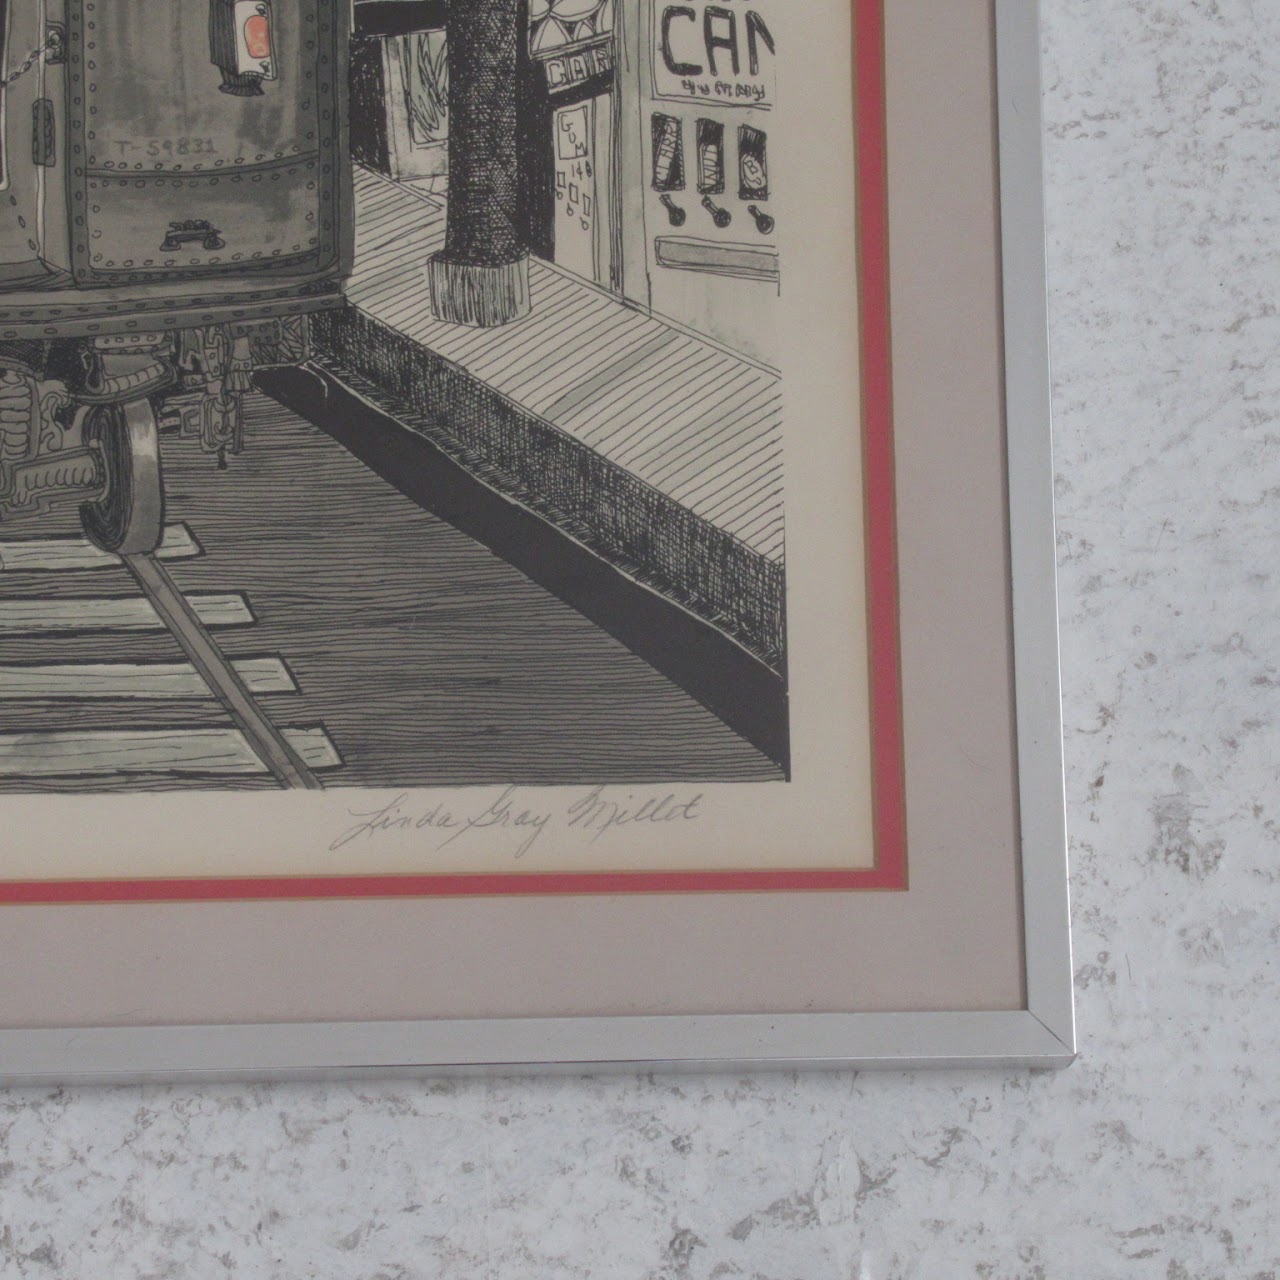 Linda Gray Millet Signed 'The Local' Subway Lithograph